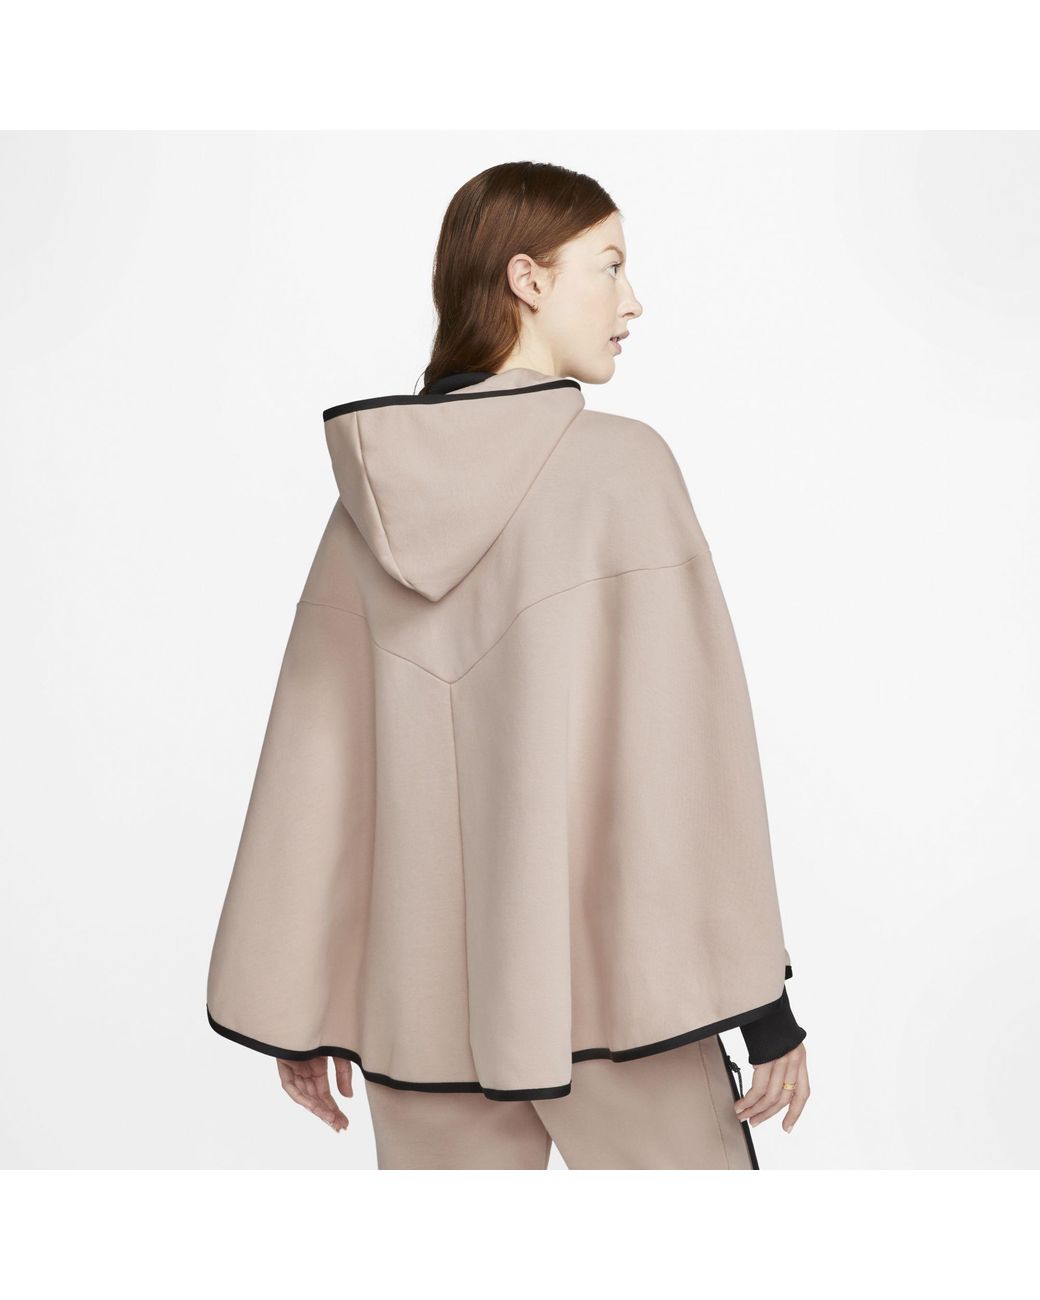 Nike Tech Fleece Essential Poncho in Natural | Lyst